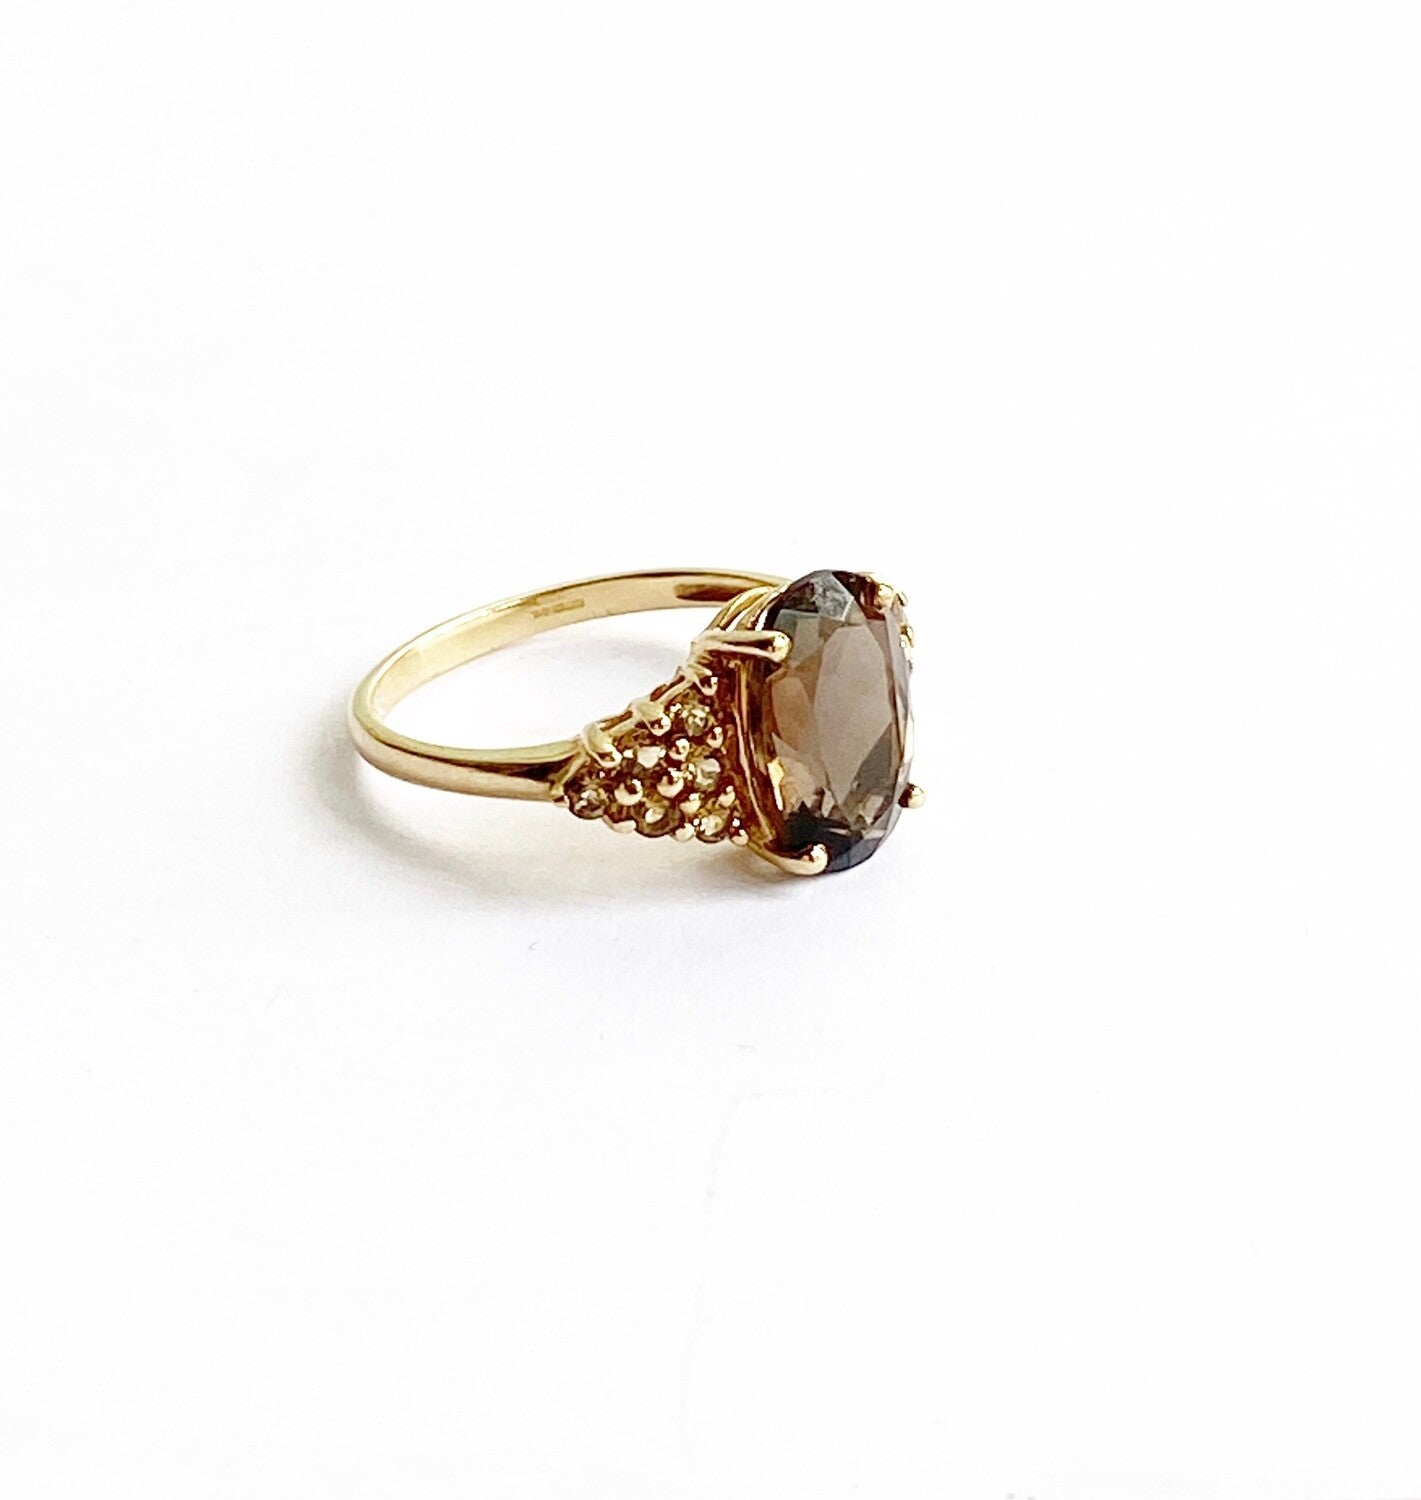 9ct pre owned smokey quartz and citrine ring size P